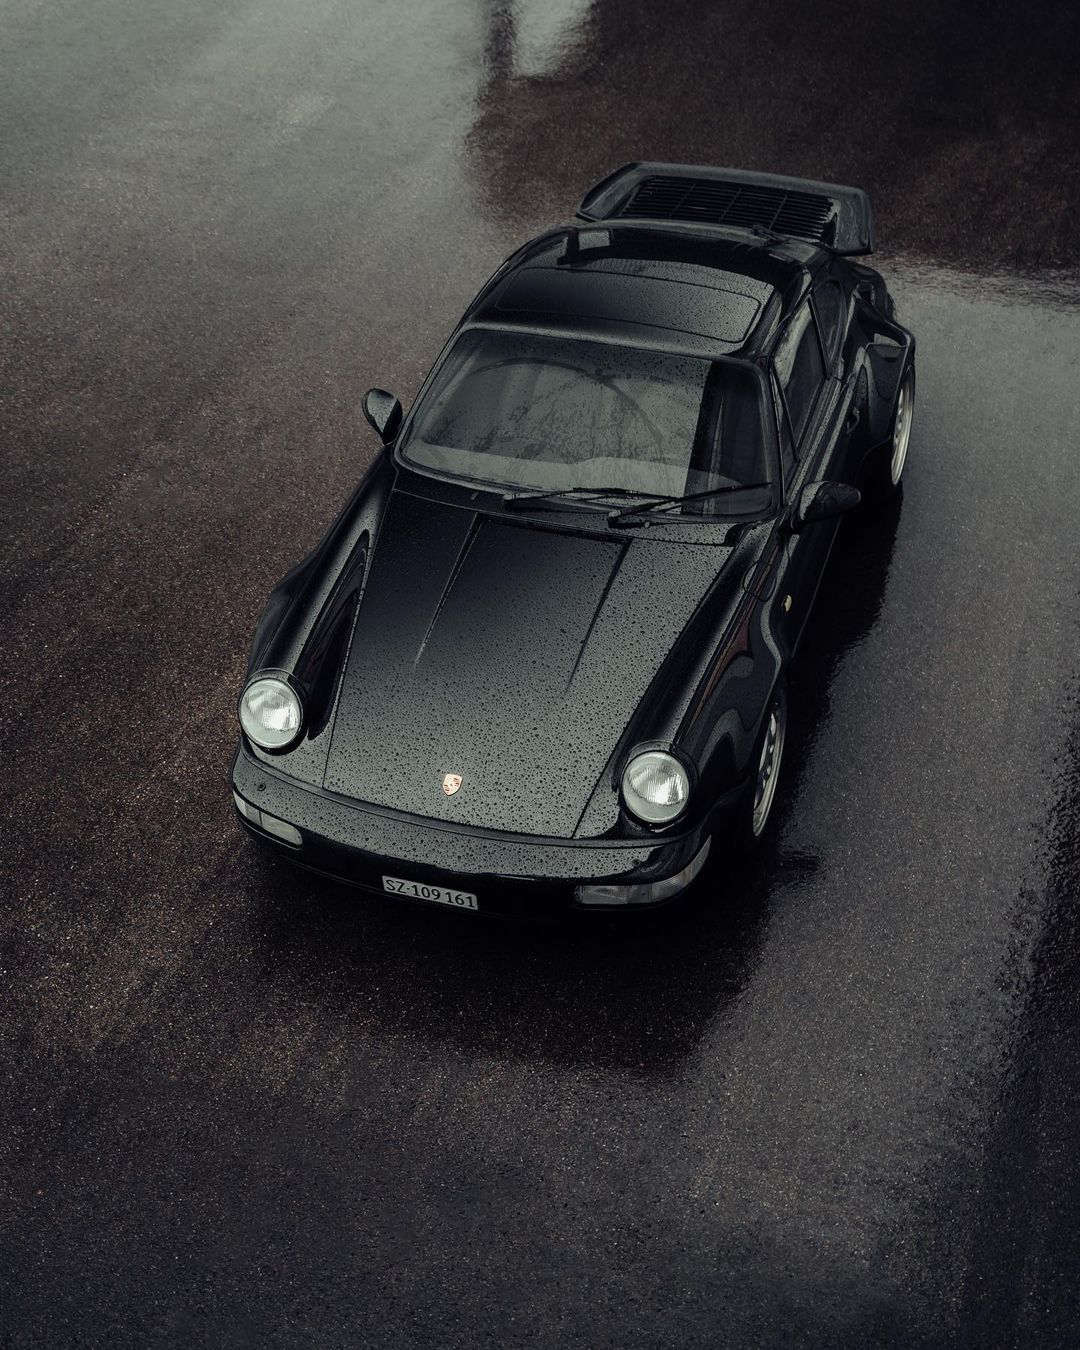 Black Porsche 911 (type 964) on wet road, from above